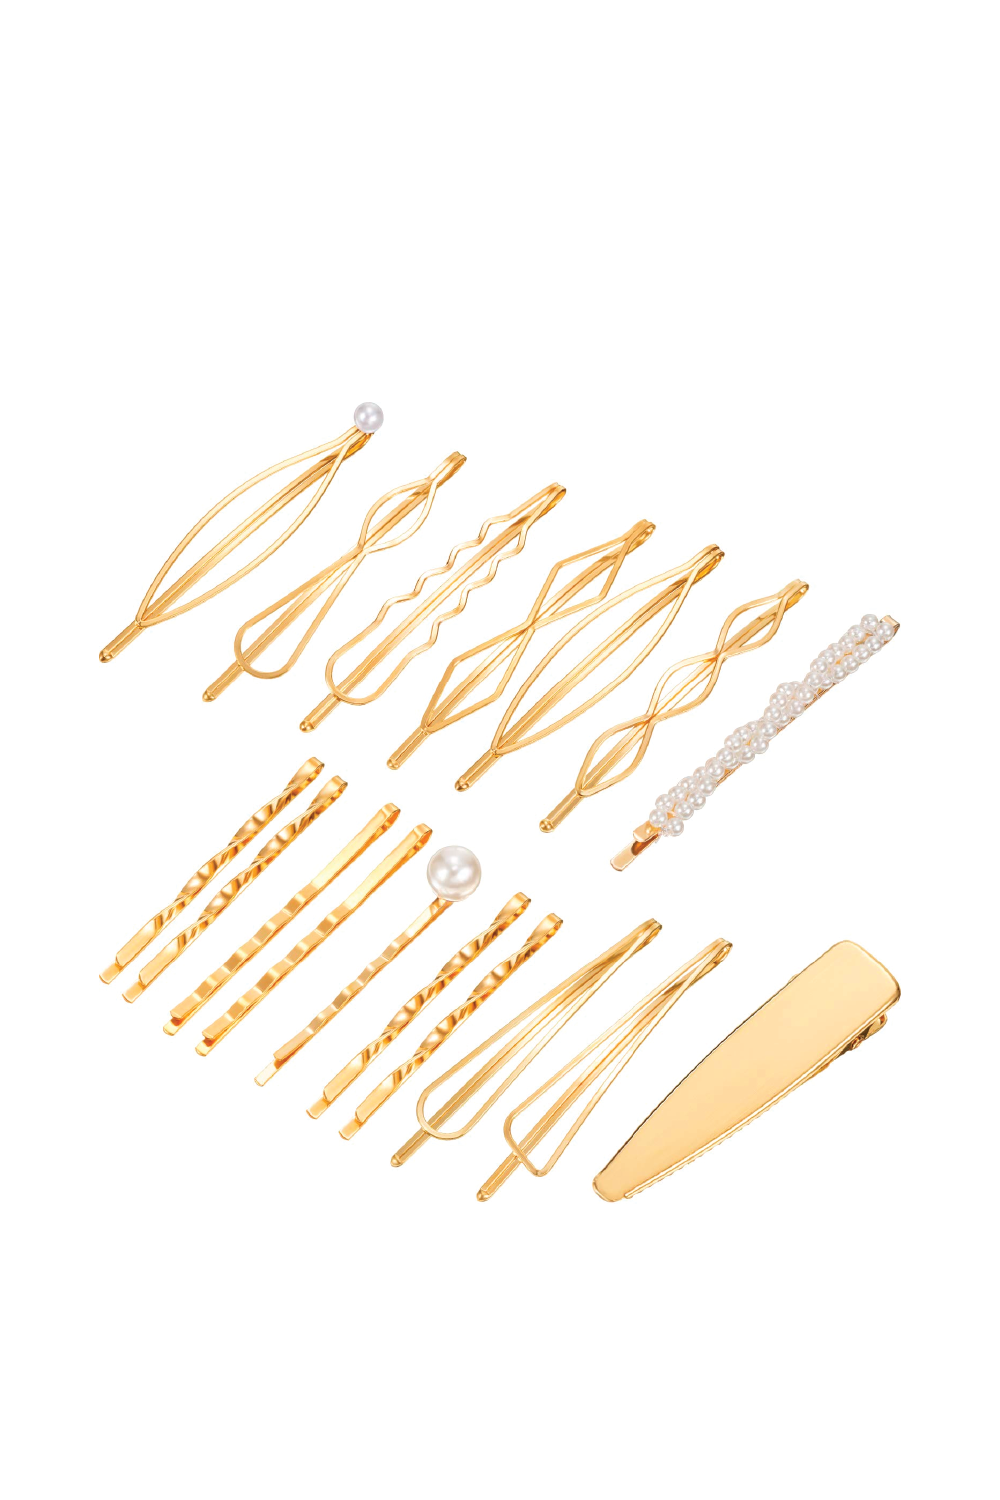 Yaomiao 17 Pieces Gold Hair Pins